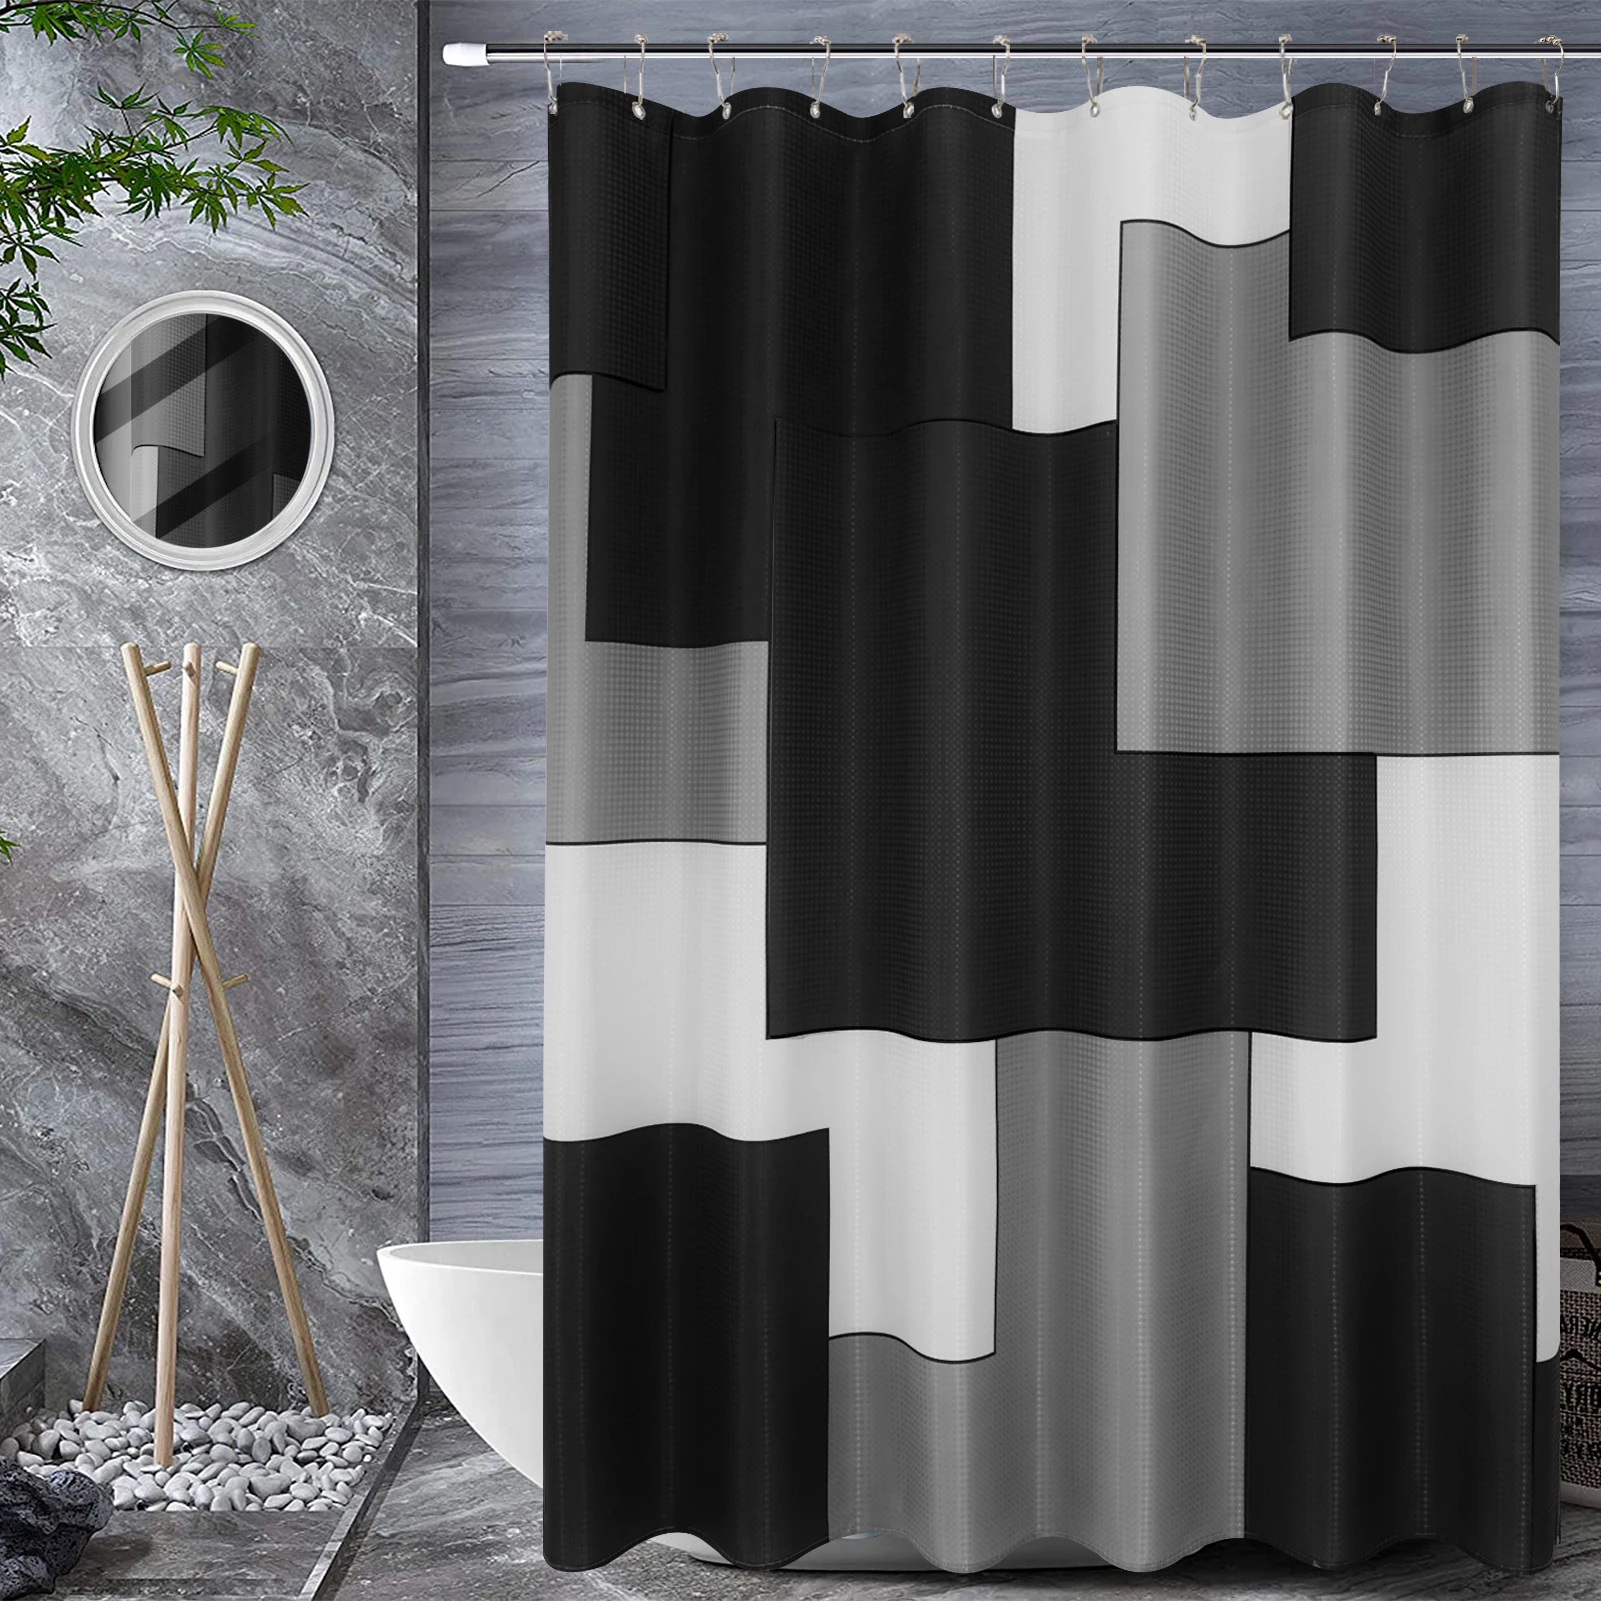 

Modern Geometric Shower Curtain Hotel Machine Washable Textured Fabric Shower Curtain Set with 12 Hooks, As color card